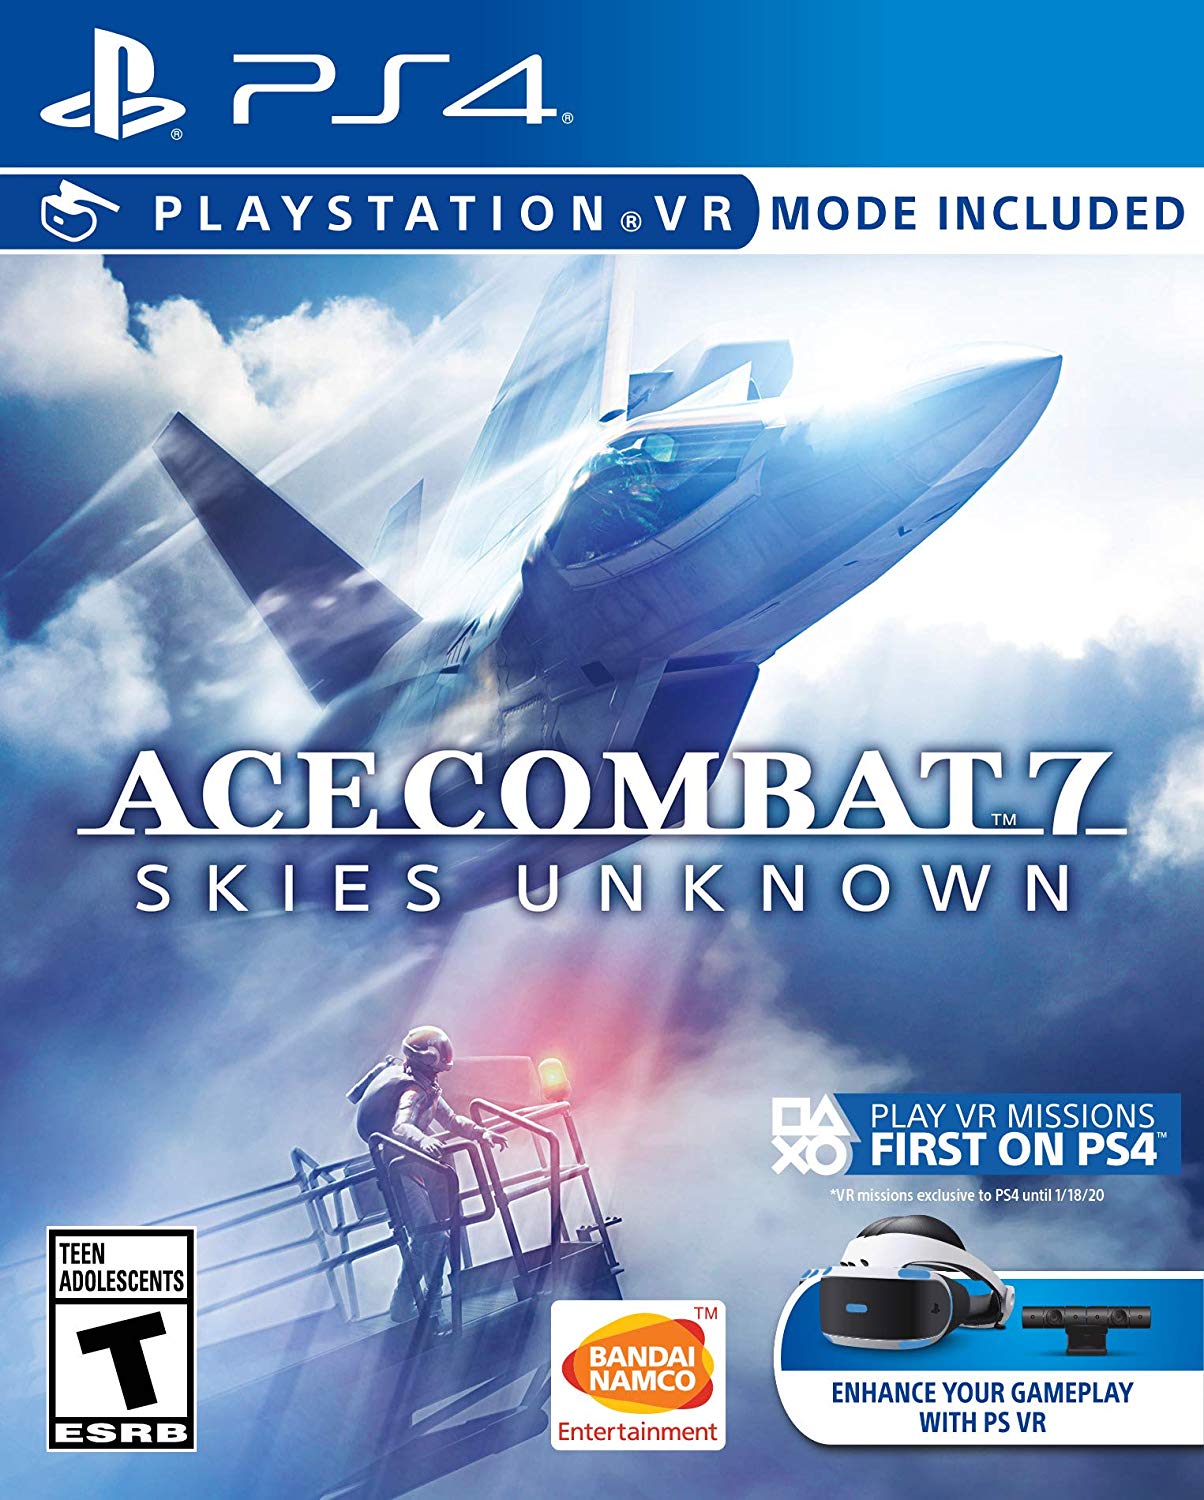 Bandai Namco Games: Ace Combat 7 Skies Unknown for PlayStation 4 [Physical] - image 1 of 4